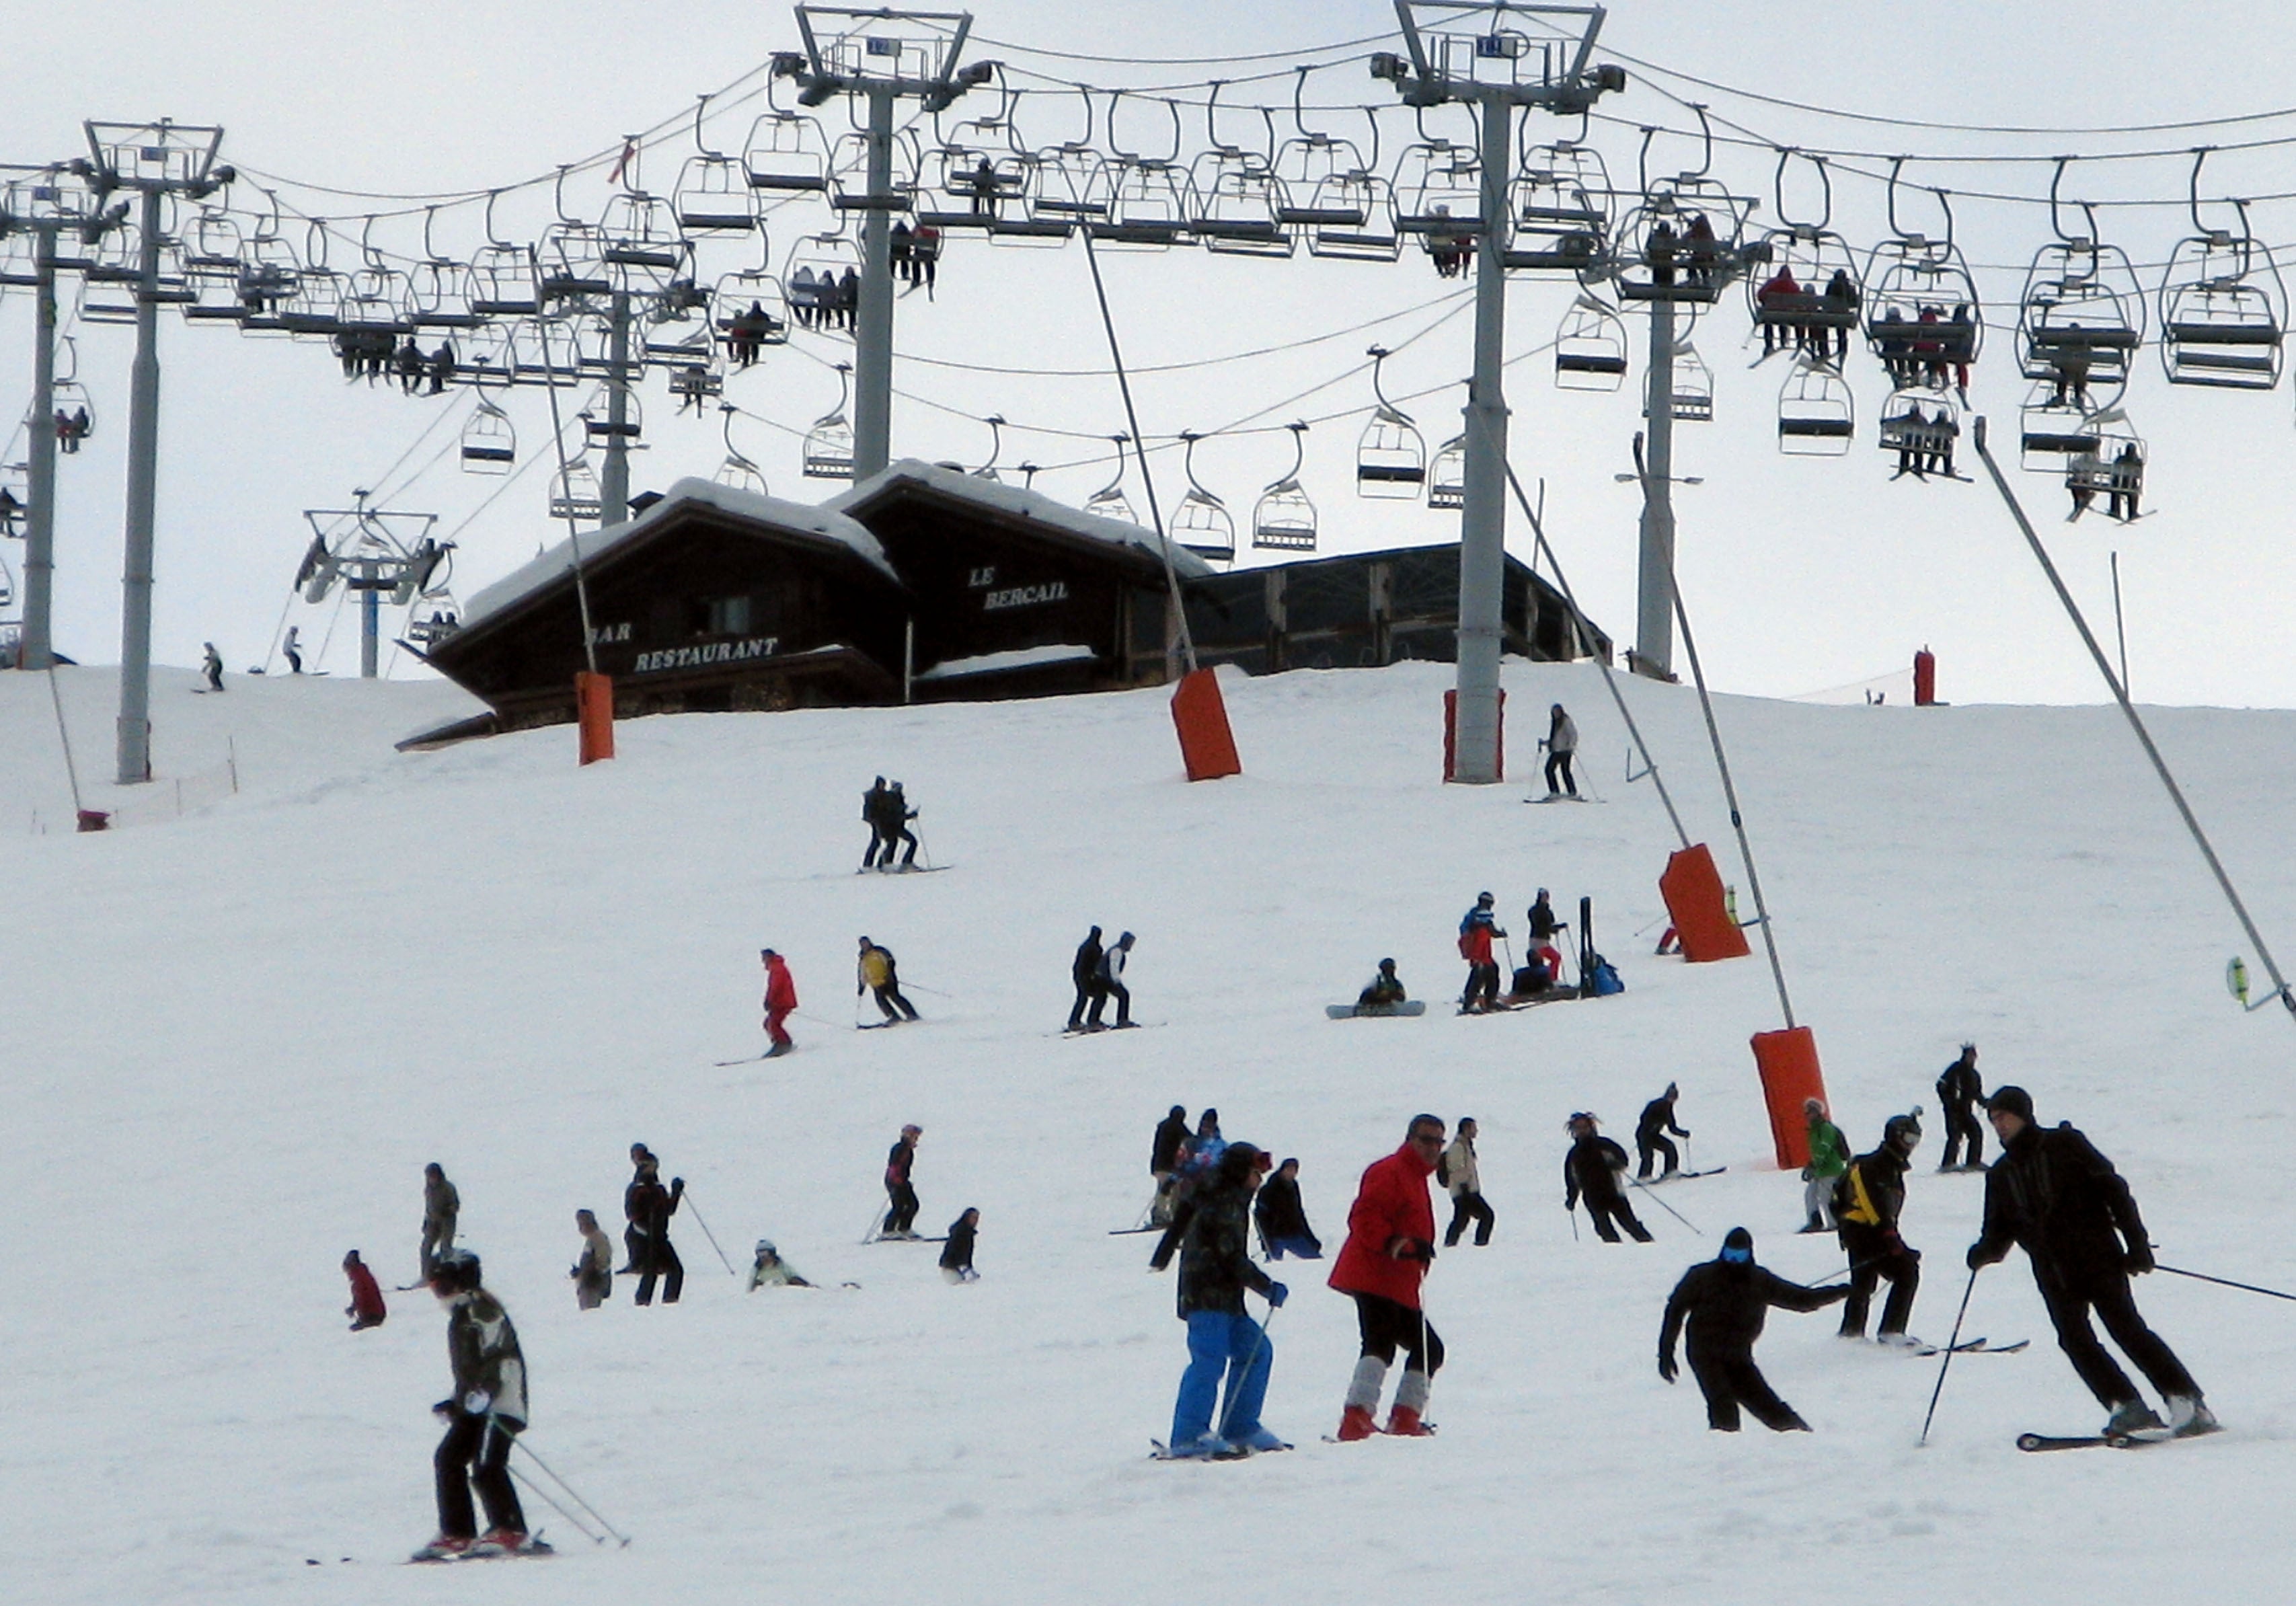 New Austrian rules mean ski holidays have been cancelled (David Cheskin/PA)